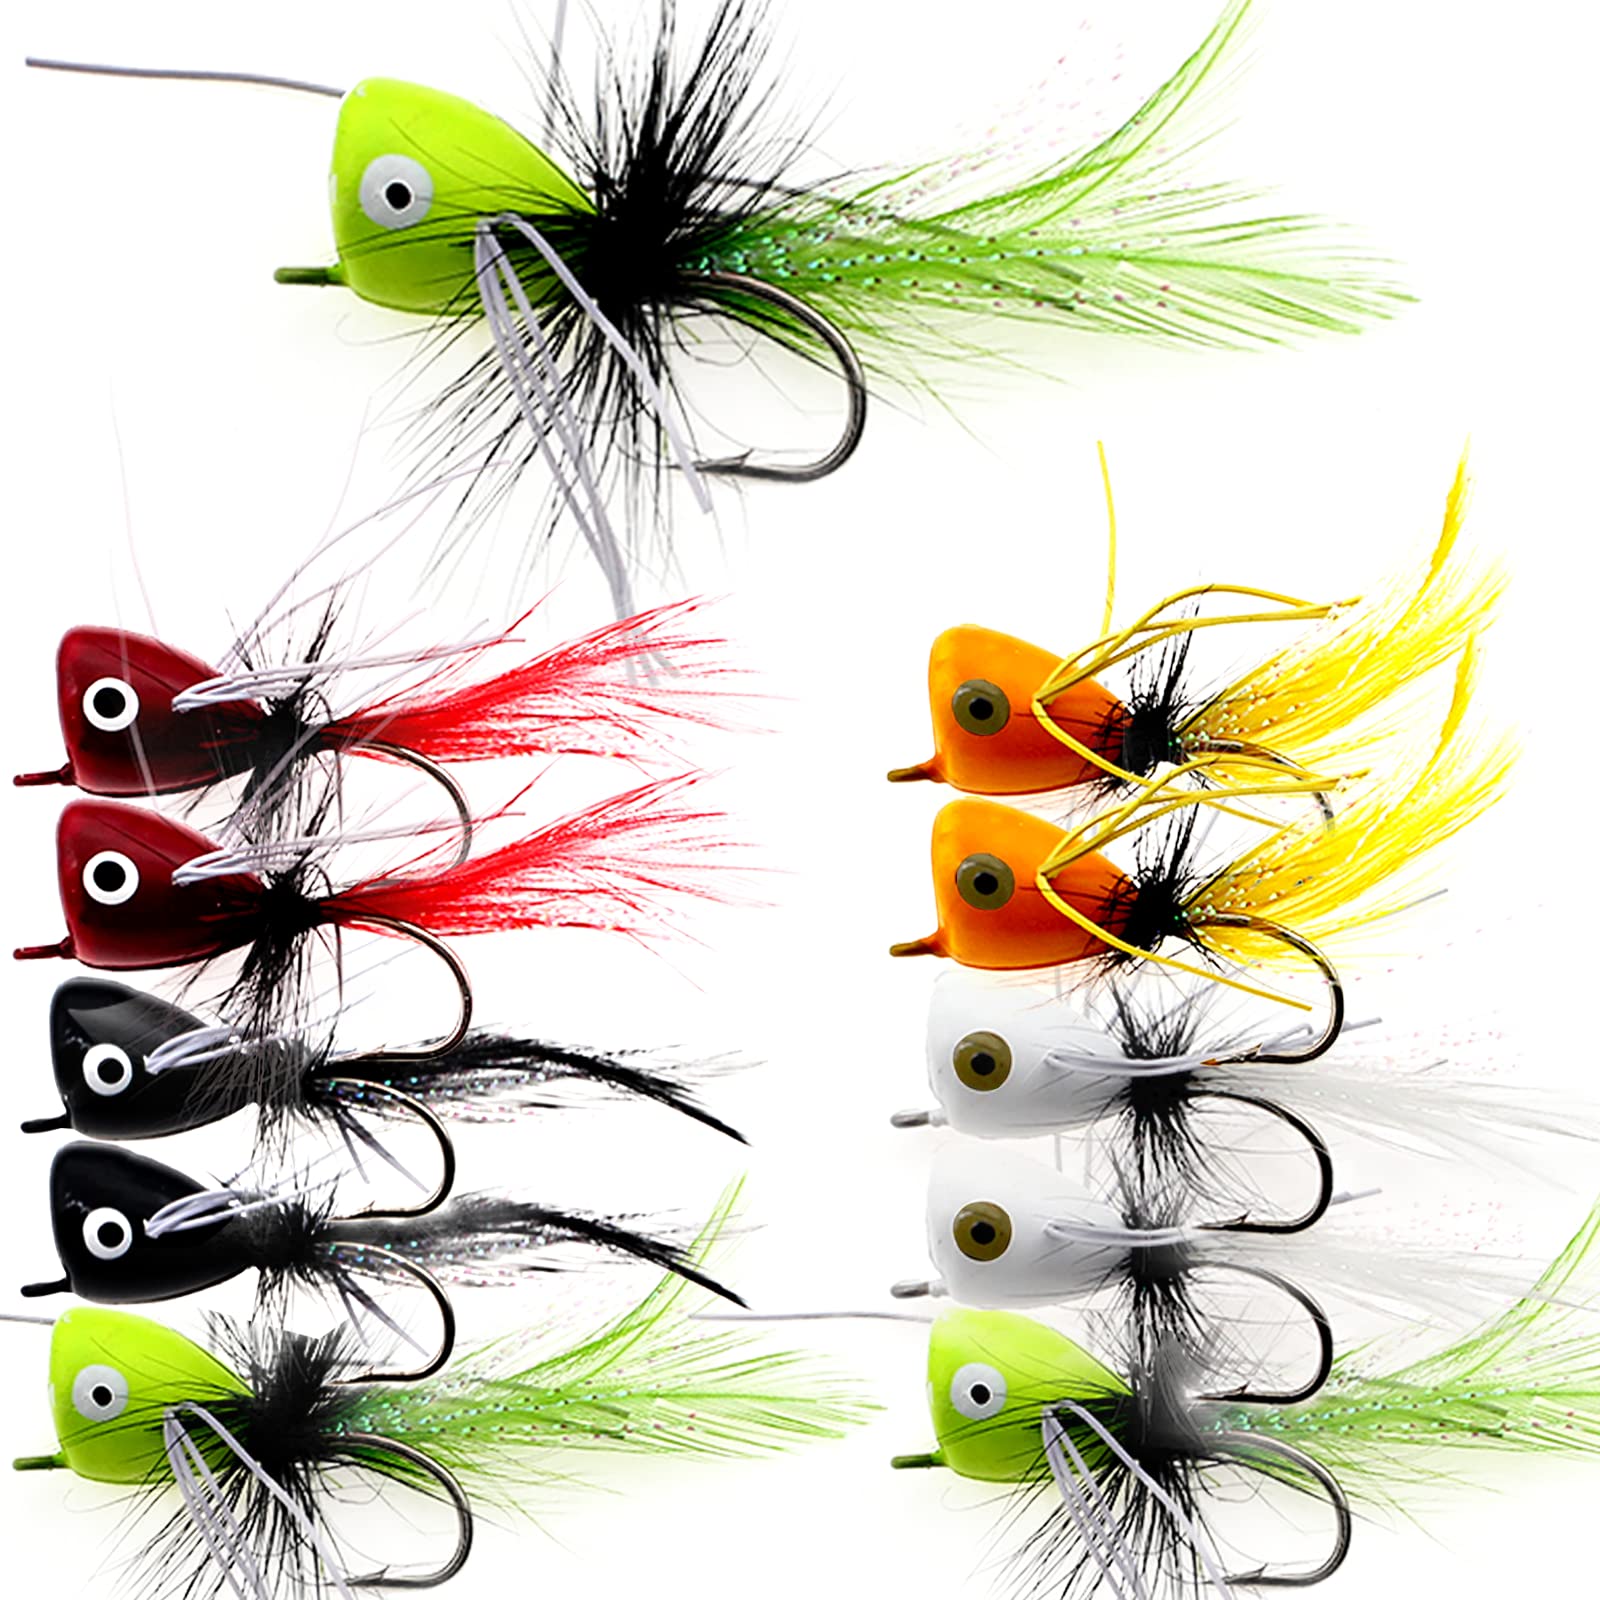 Ghanneey Fly Fishing Poppers Dry Flies Lures Fly Fishing Tying Tools for Fishing  Flies Making Accessories Bass Trout Panfish Bluegill Salmon A:Fly Fishing  Poppers 10pcs